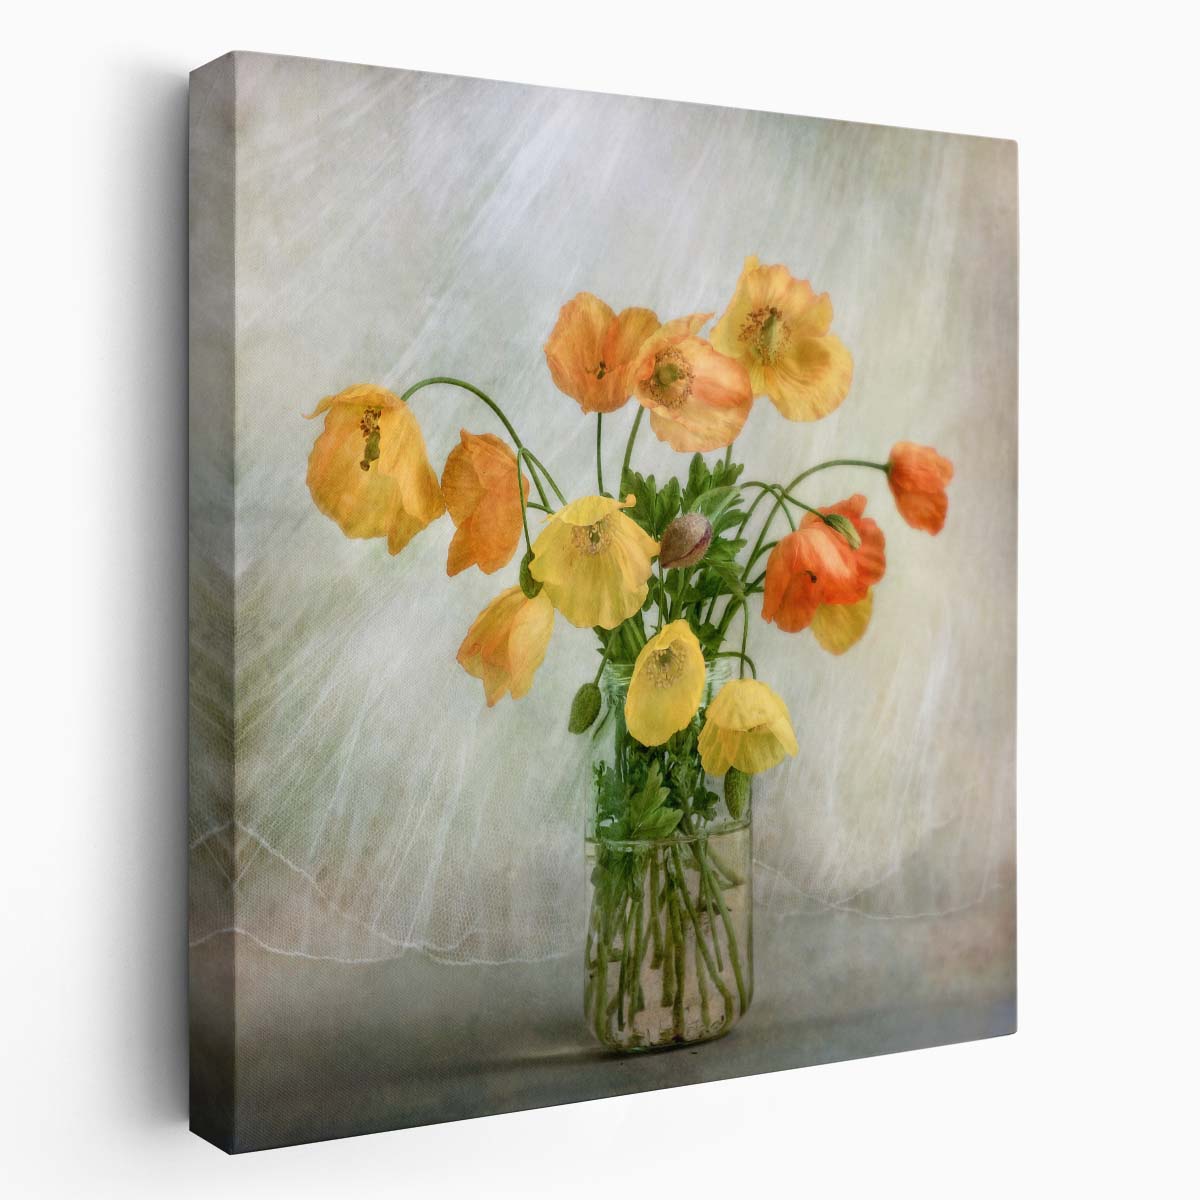 Summer Poppies in Vase A UK Floral Still Life Photography Wall Art by Luxuriance Designs. Made in USA.